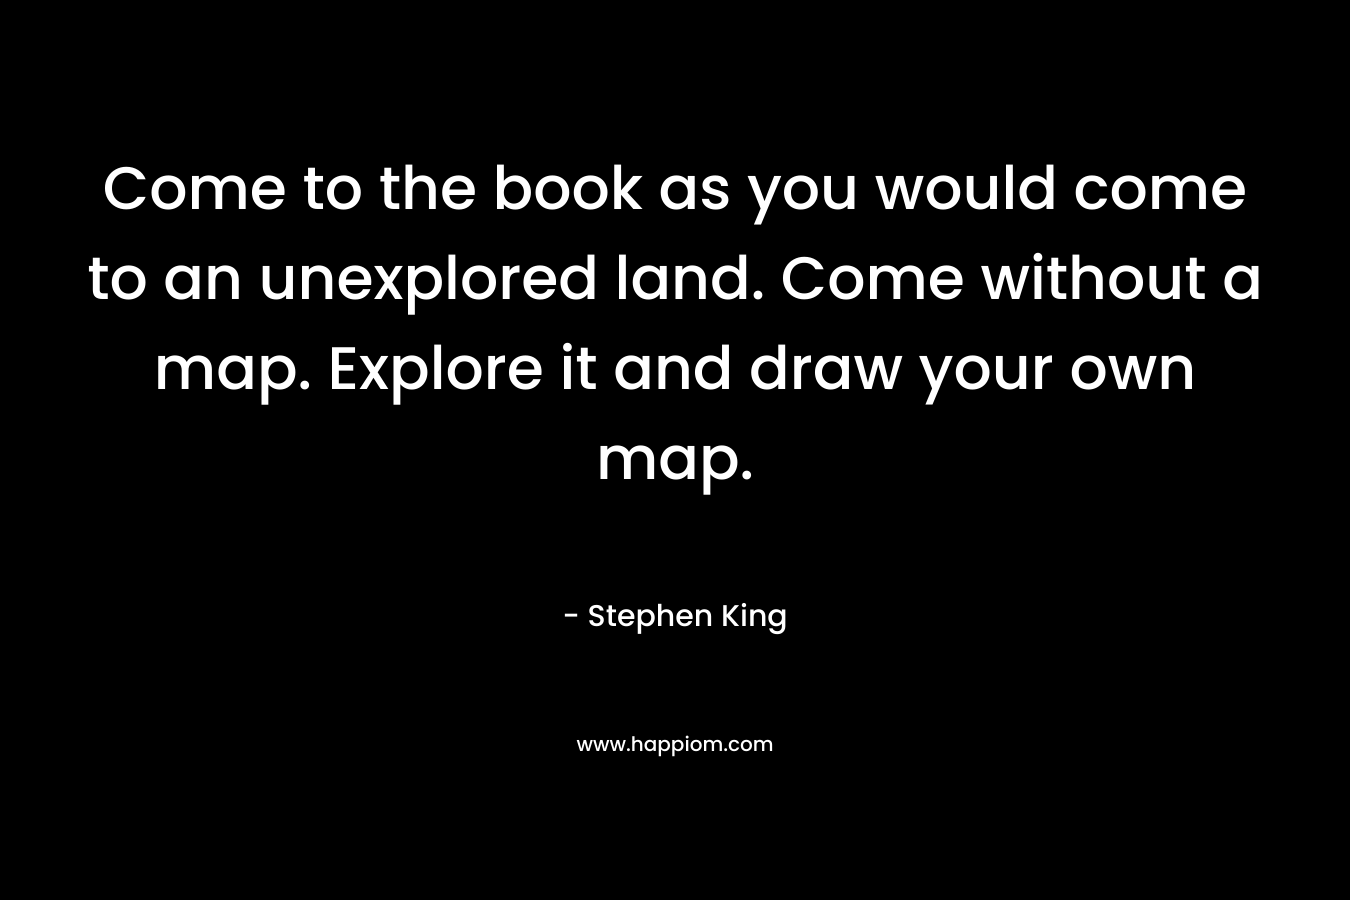 Come to the book as you would come to an unexplored land. Come without a map. Explore it and draw your own map.